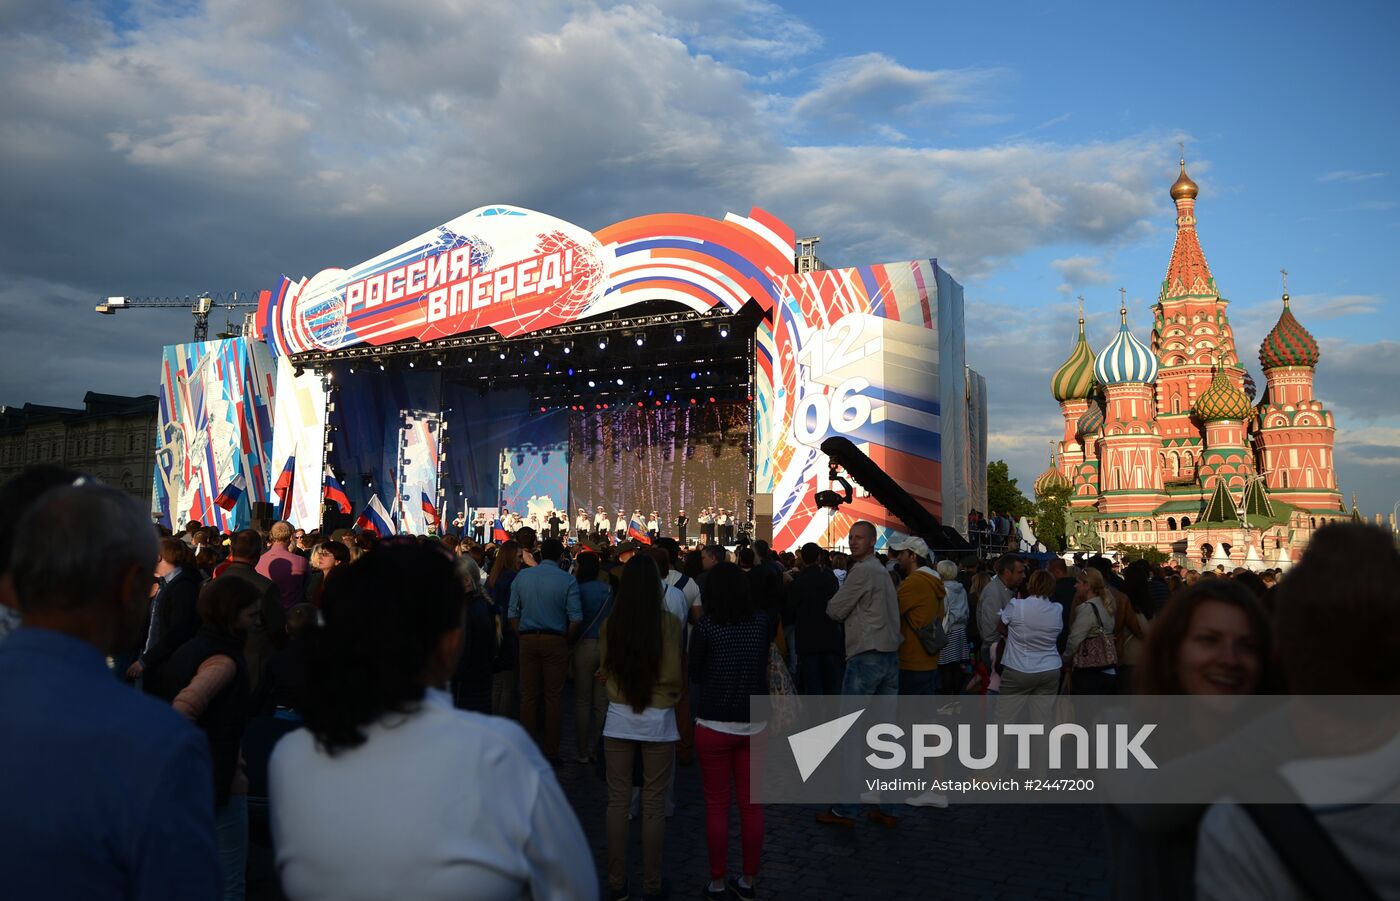 Rossiya Vpered gala concert on Red Square